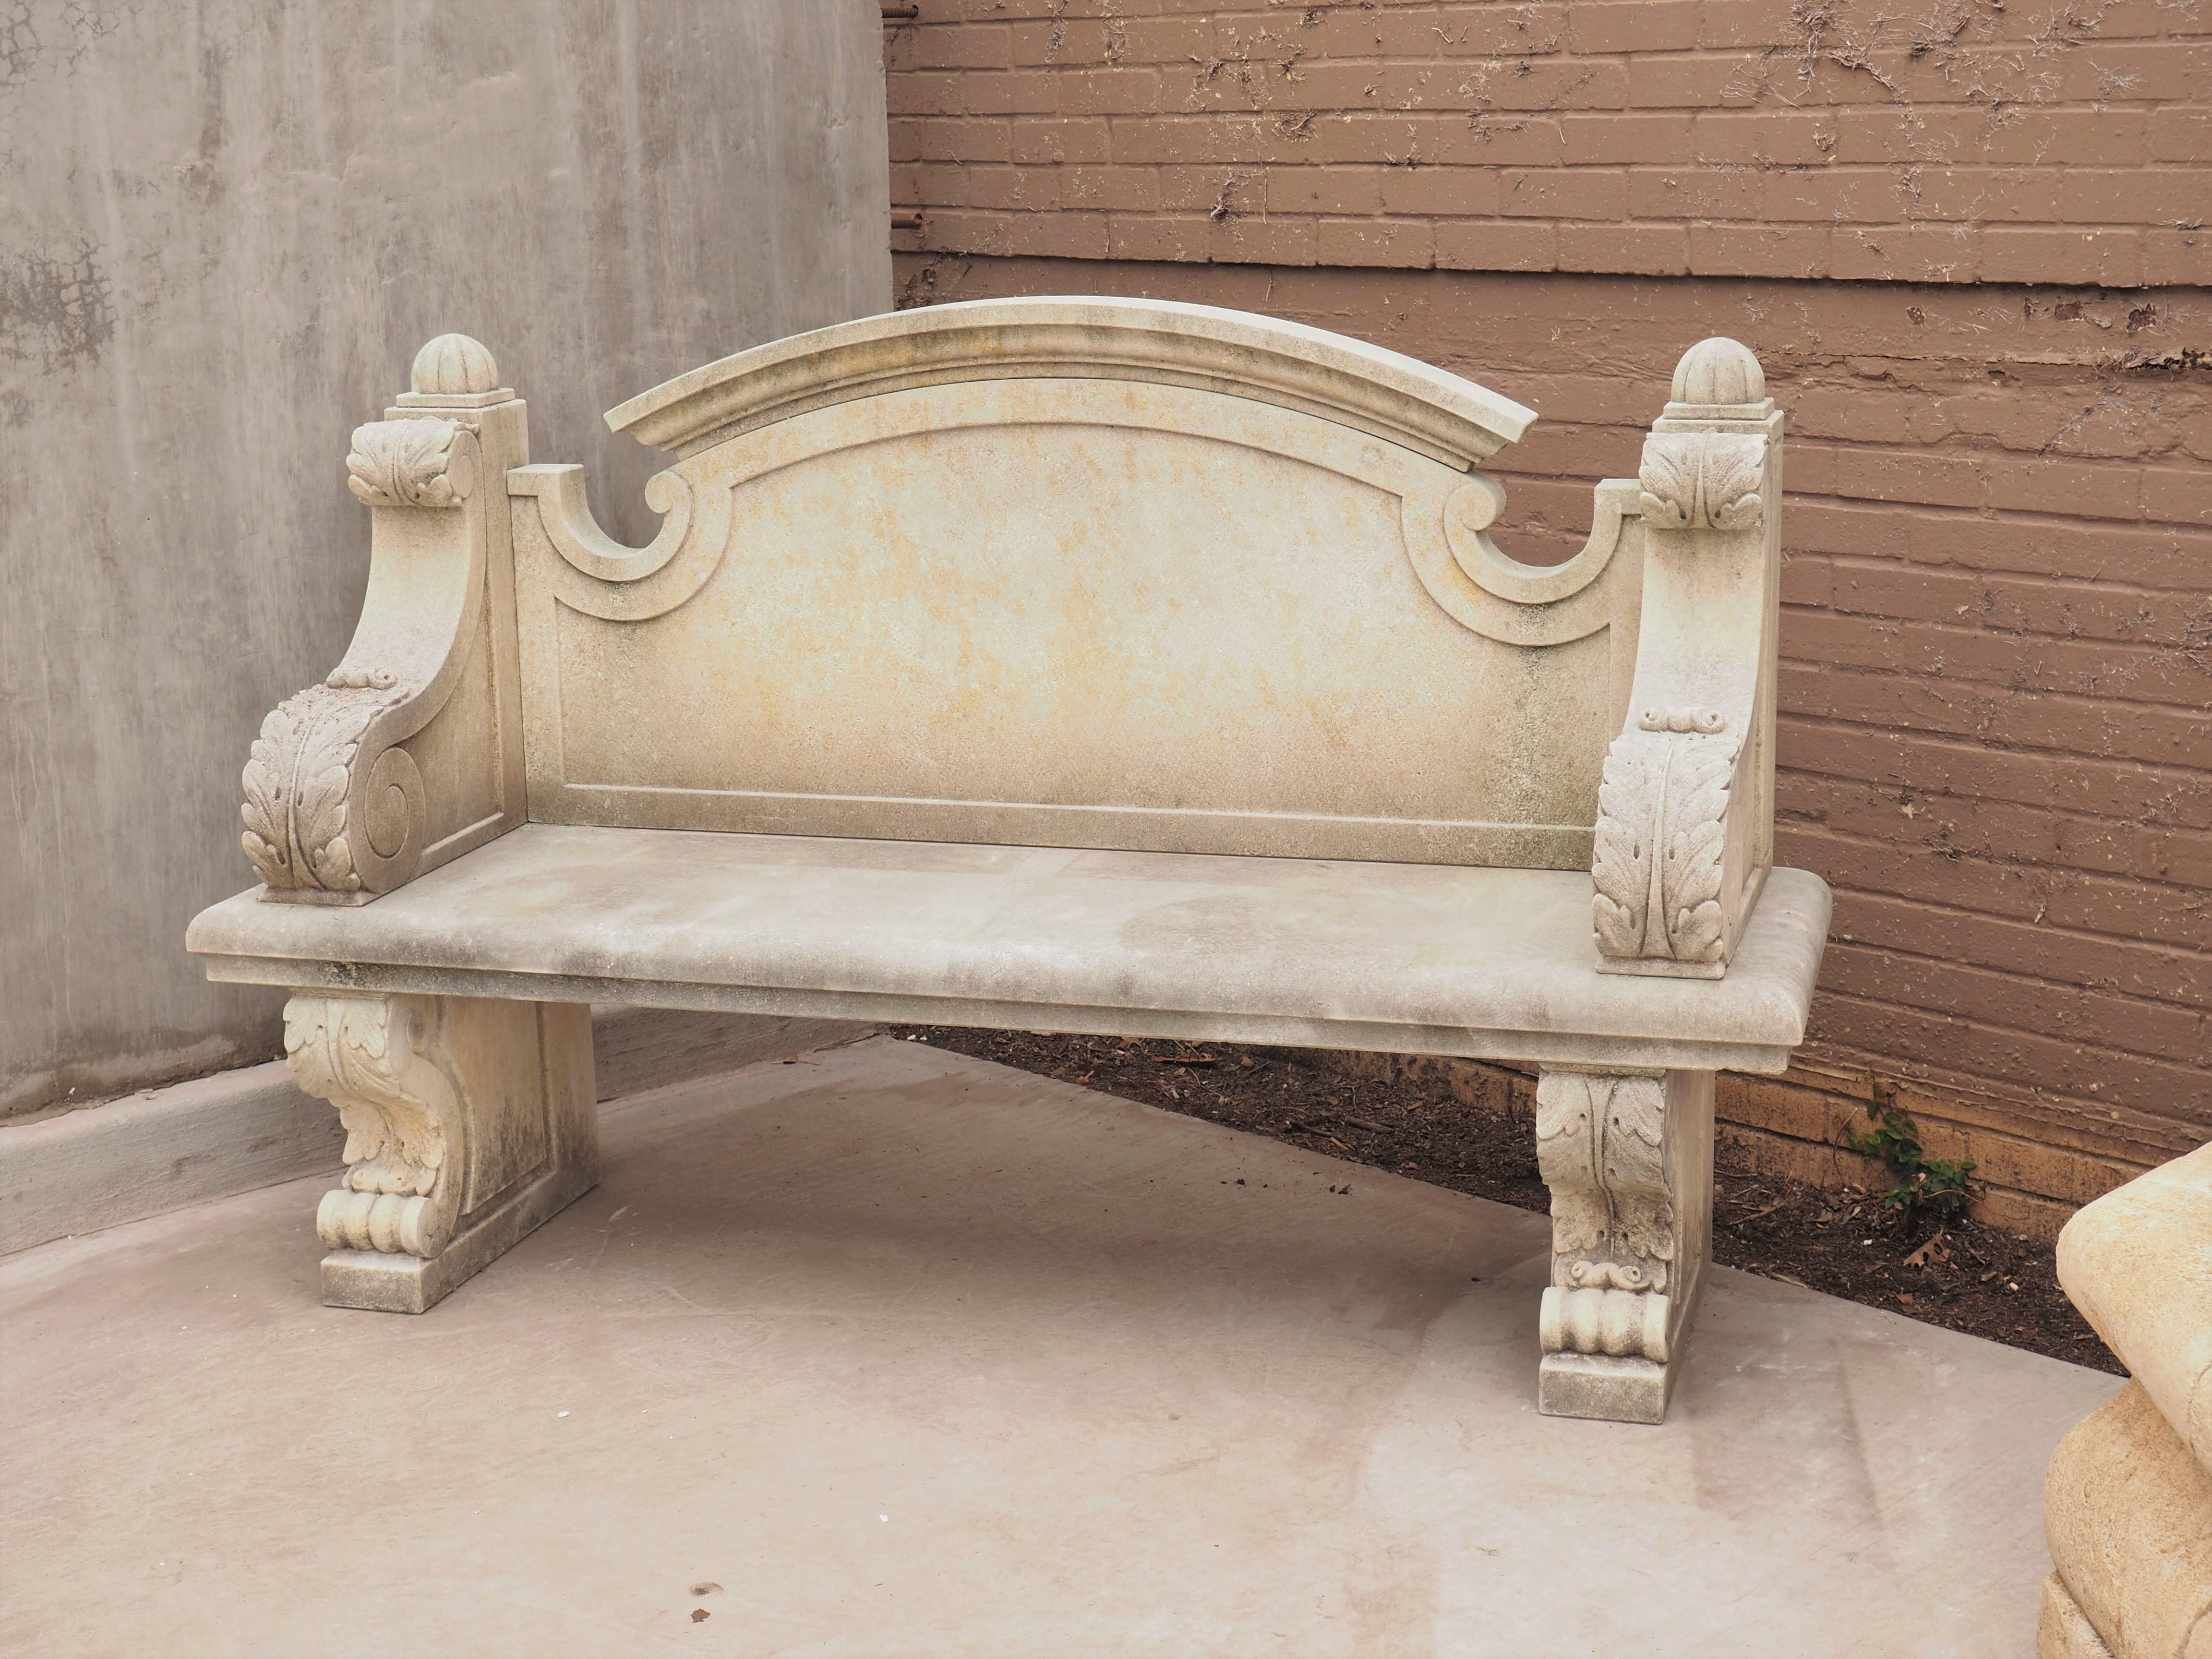 Hand-carved in Italy from six pieces of limestone, this garden bench has a shaped arched backrest and acanthus sides. The bottom of the arch of the backrest has been incised with C-scrolled edges. A thick molding follows the edges on all sides,